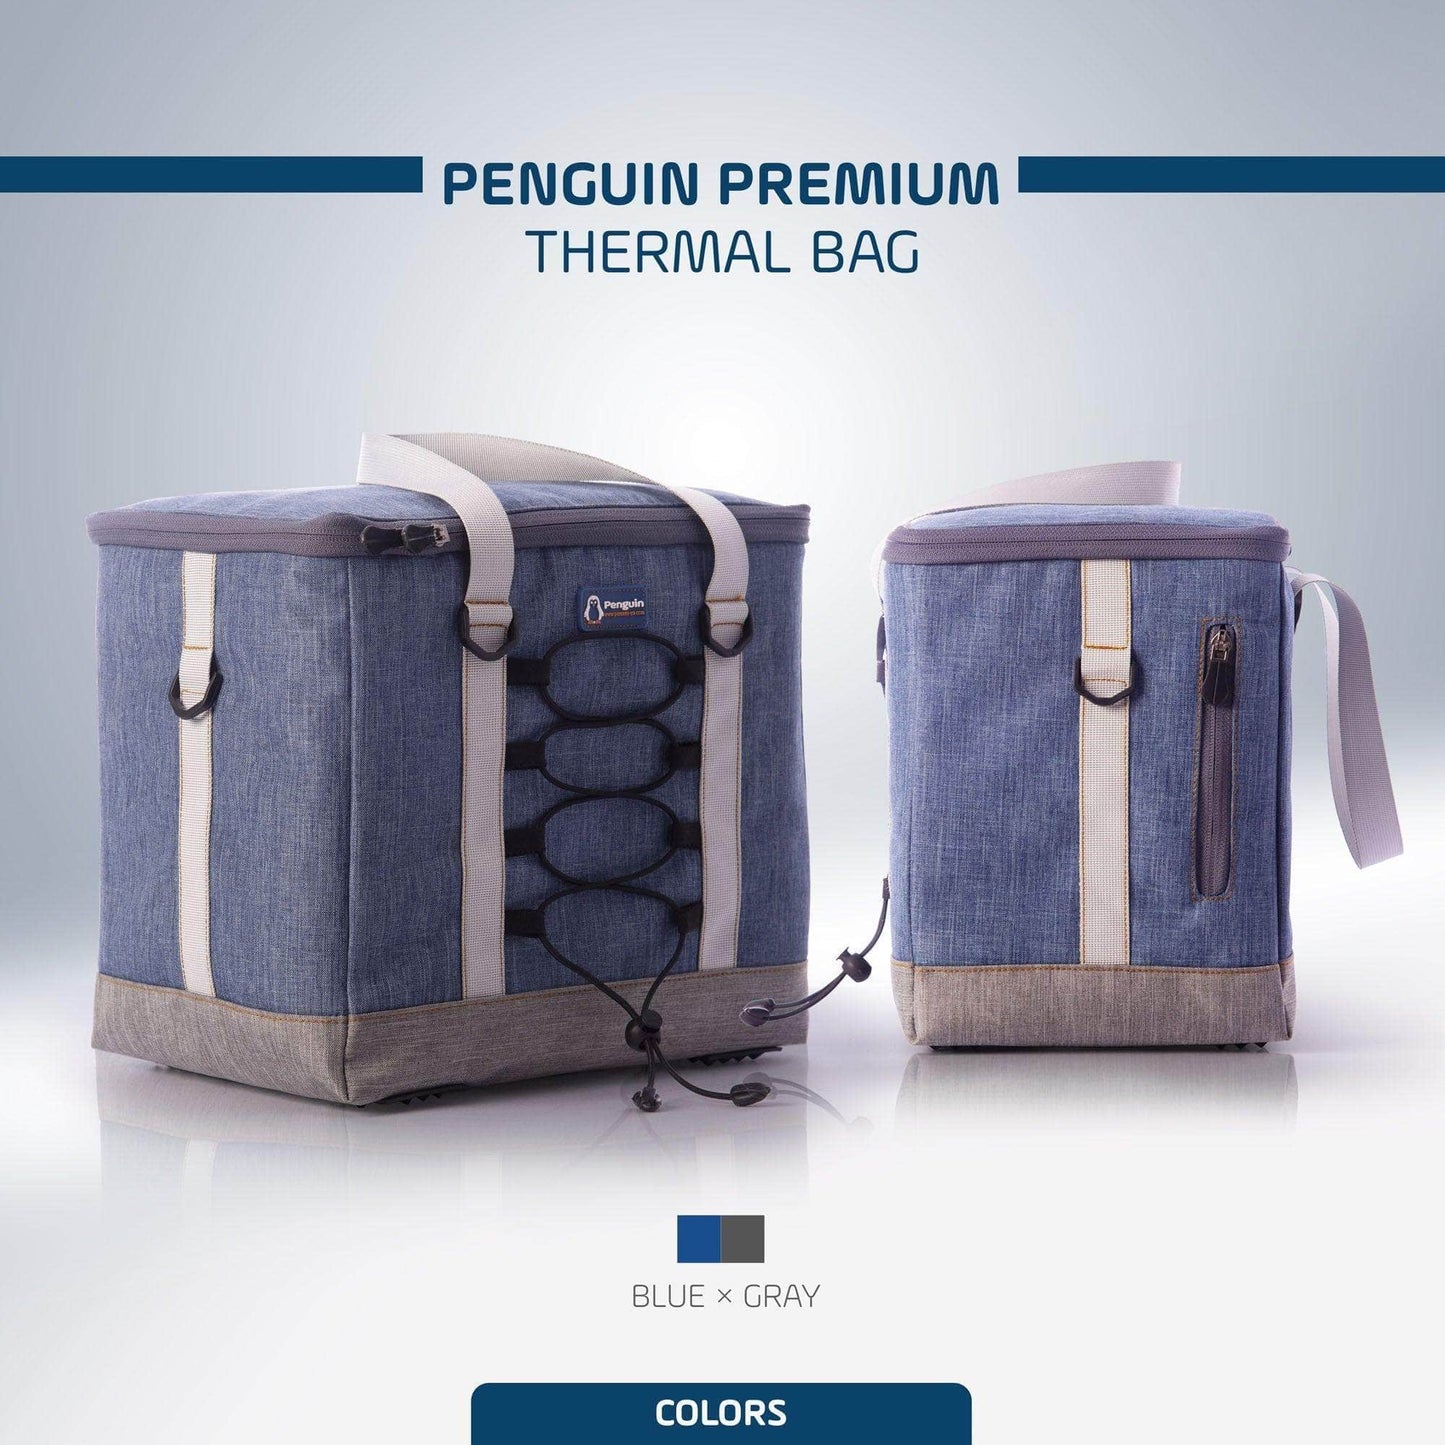 Penguin Group Thermal Bag Blue 15 Liters, Exotic Jeans 3X Insulated thermal Bag